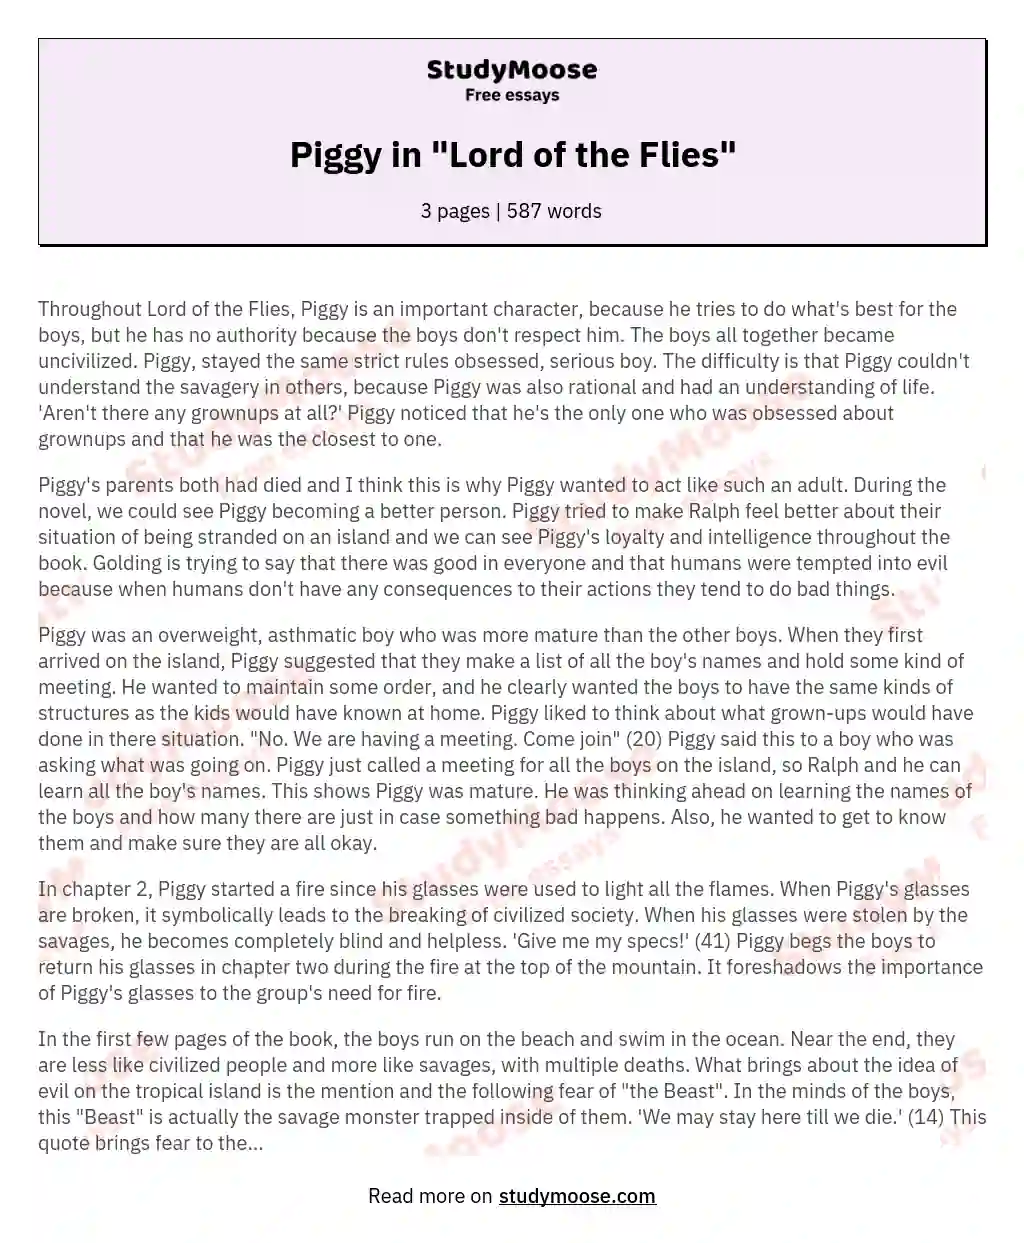 Piggy in "Lord of the Flies" essay